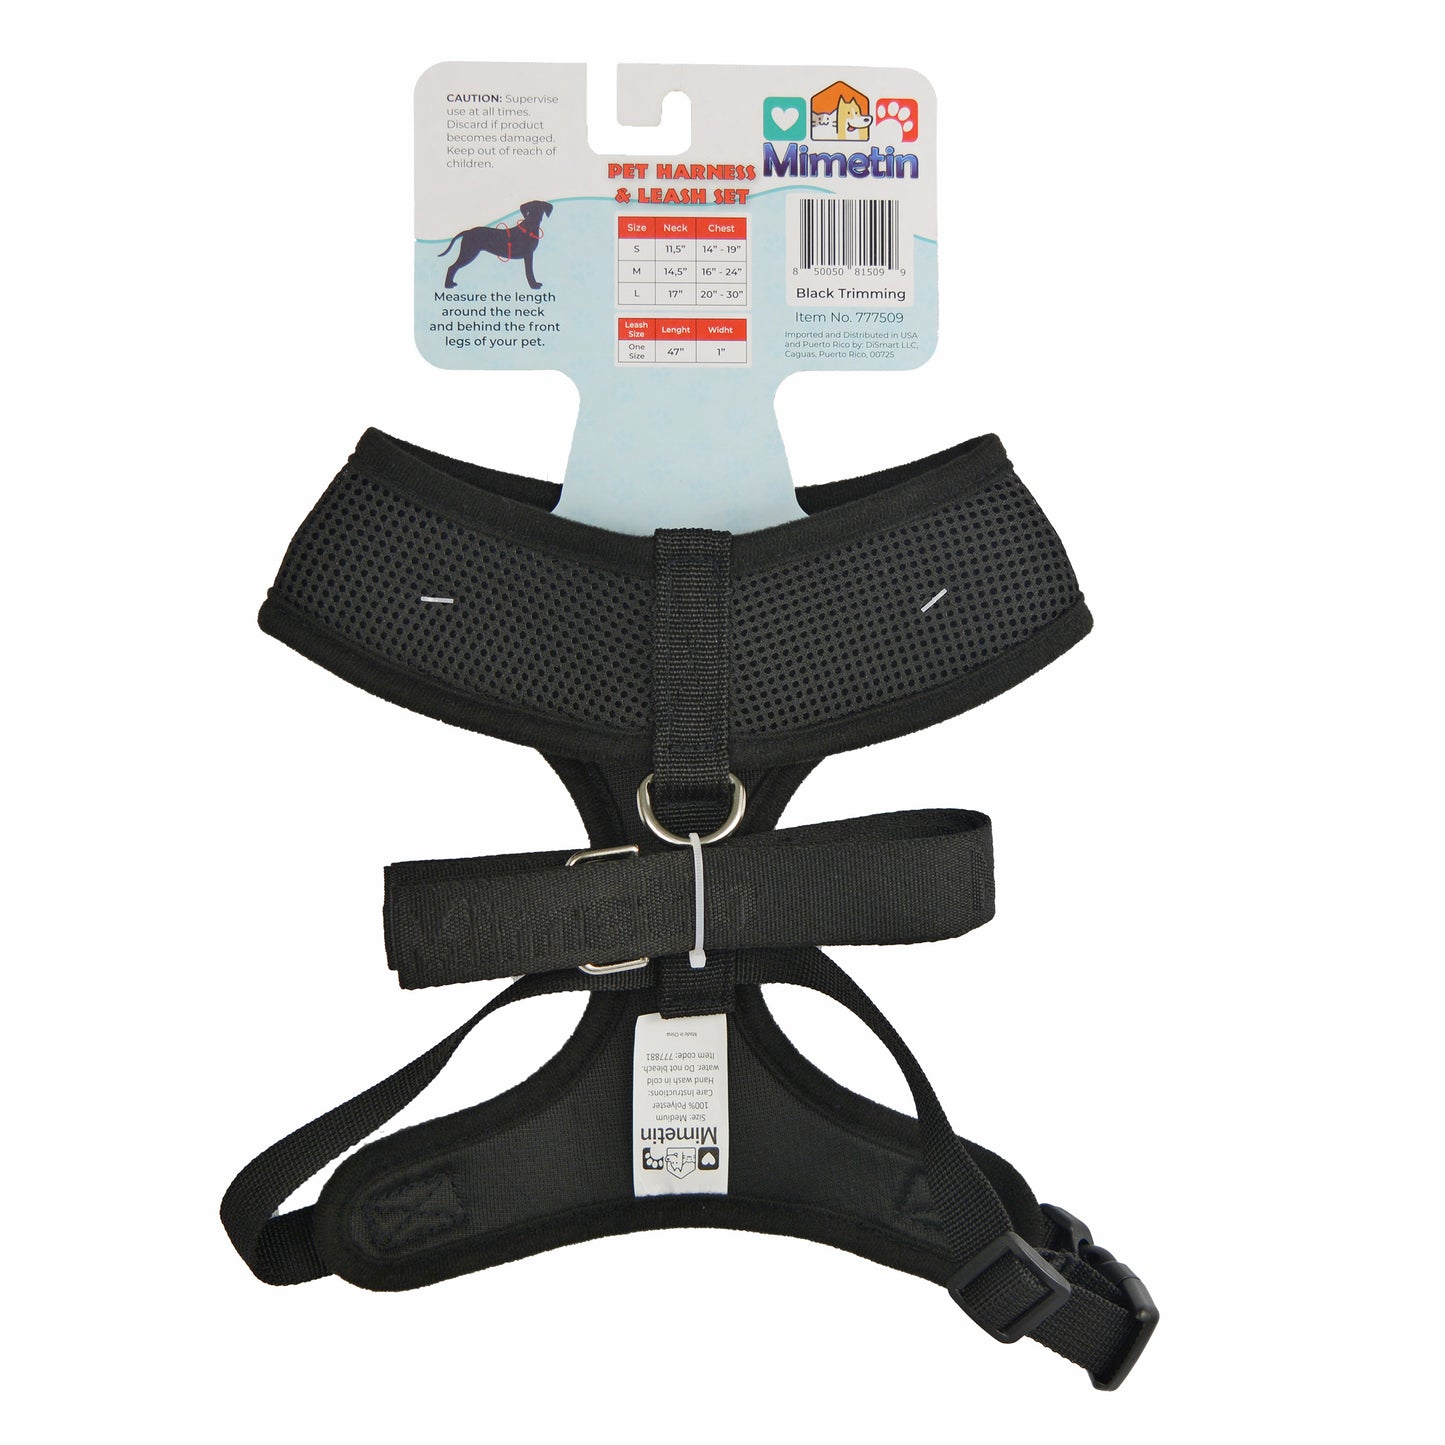 Mimetin Soft Pet Harness with Leash Adjustable Walking Pet Harness, Black, M (16" to 24" Chest Size) 2 Piece Set